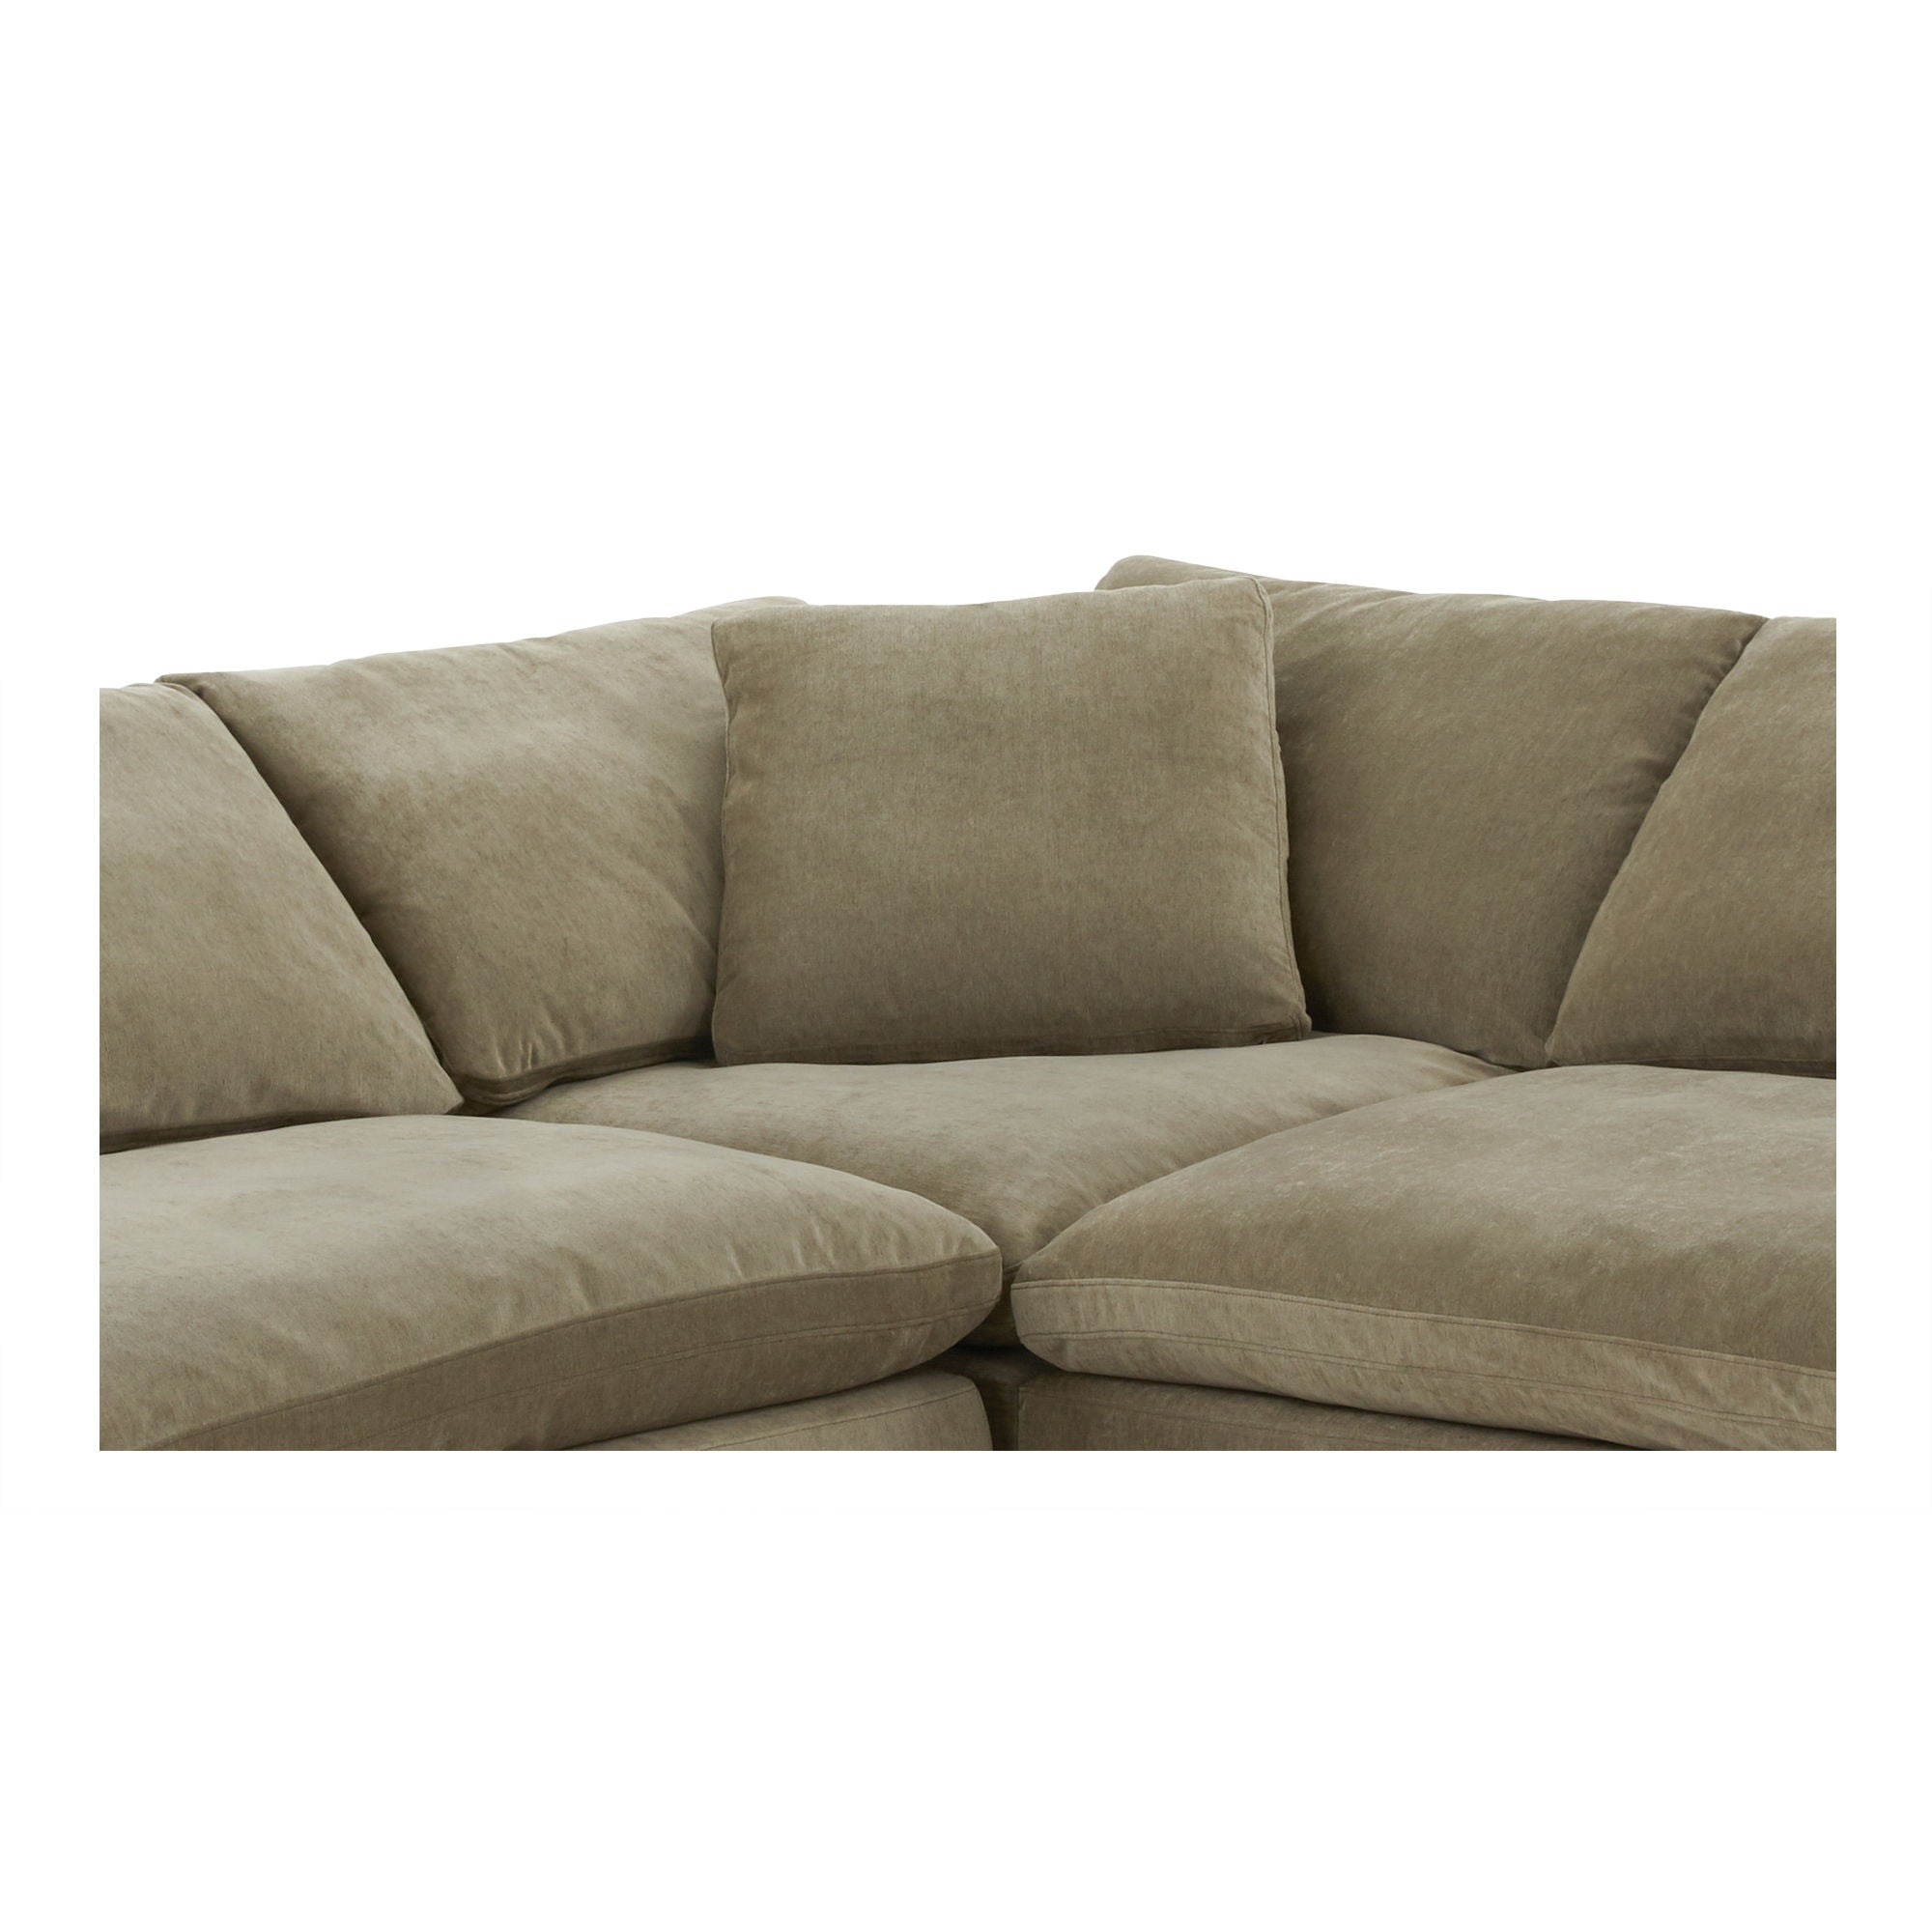 Terra Dream Modular Sectional - Desert Sage - Stain Resistant-Stationary Sectionals-American Furniture Outlet